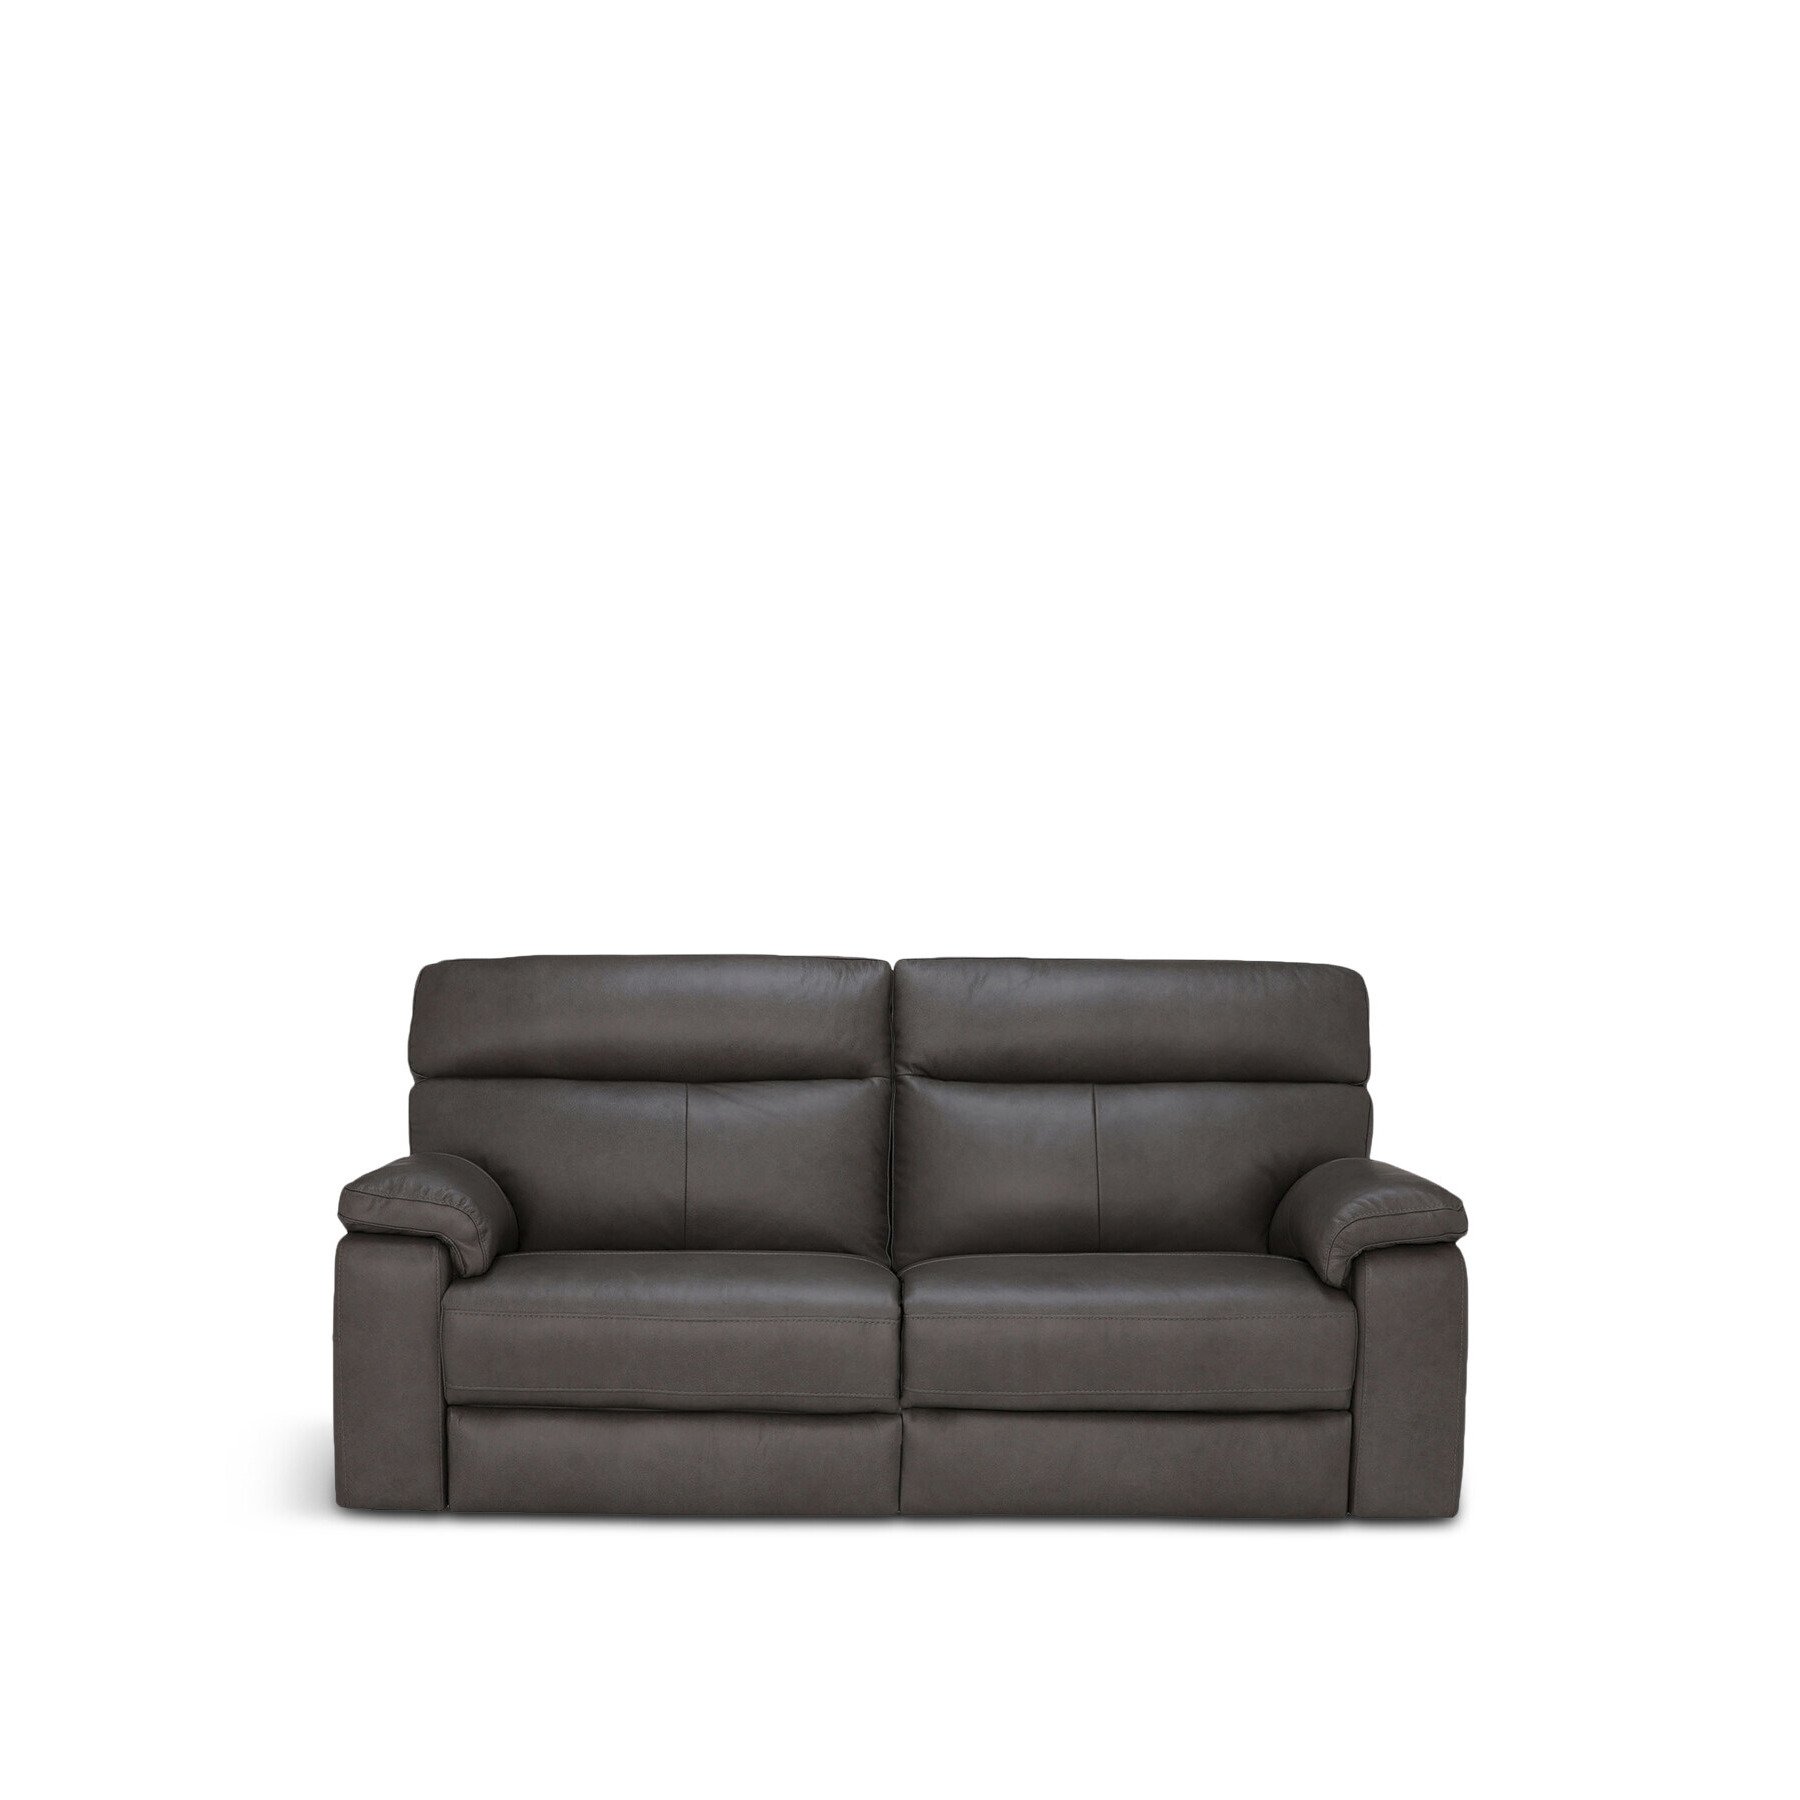 Barker and Stonehouse Clark Charcoal Leather 3 Seater Sofa With Power Motion Recliner Brown - image 1